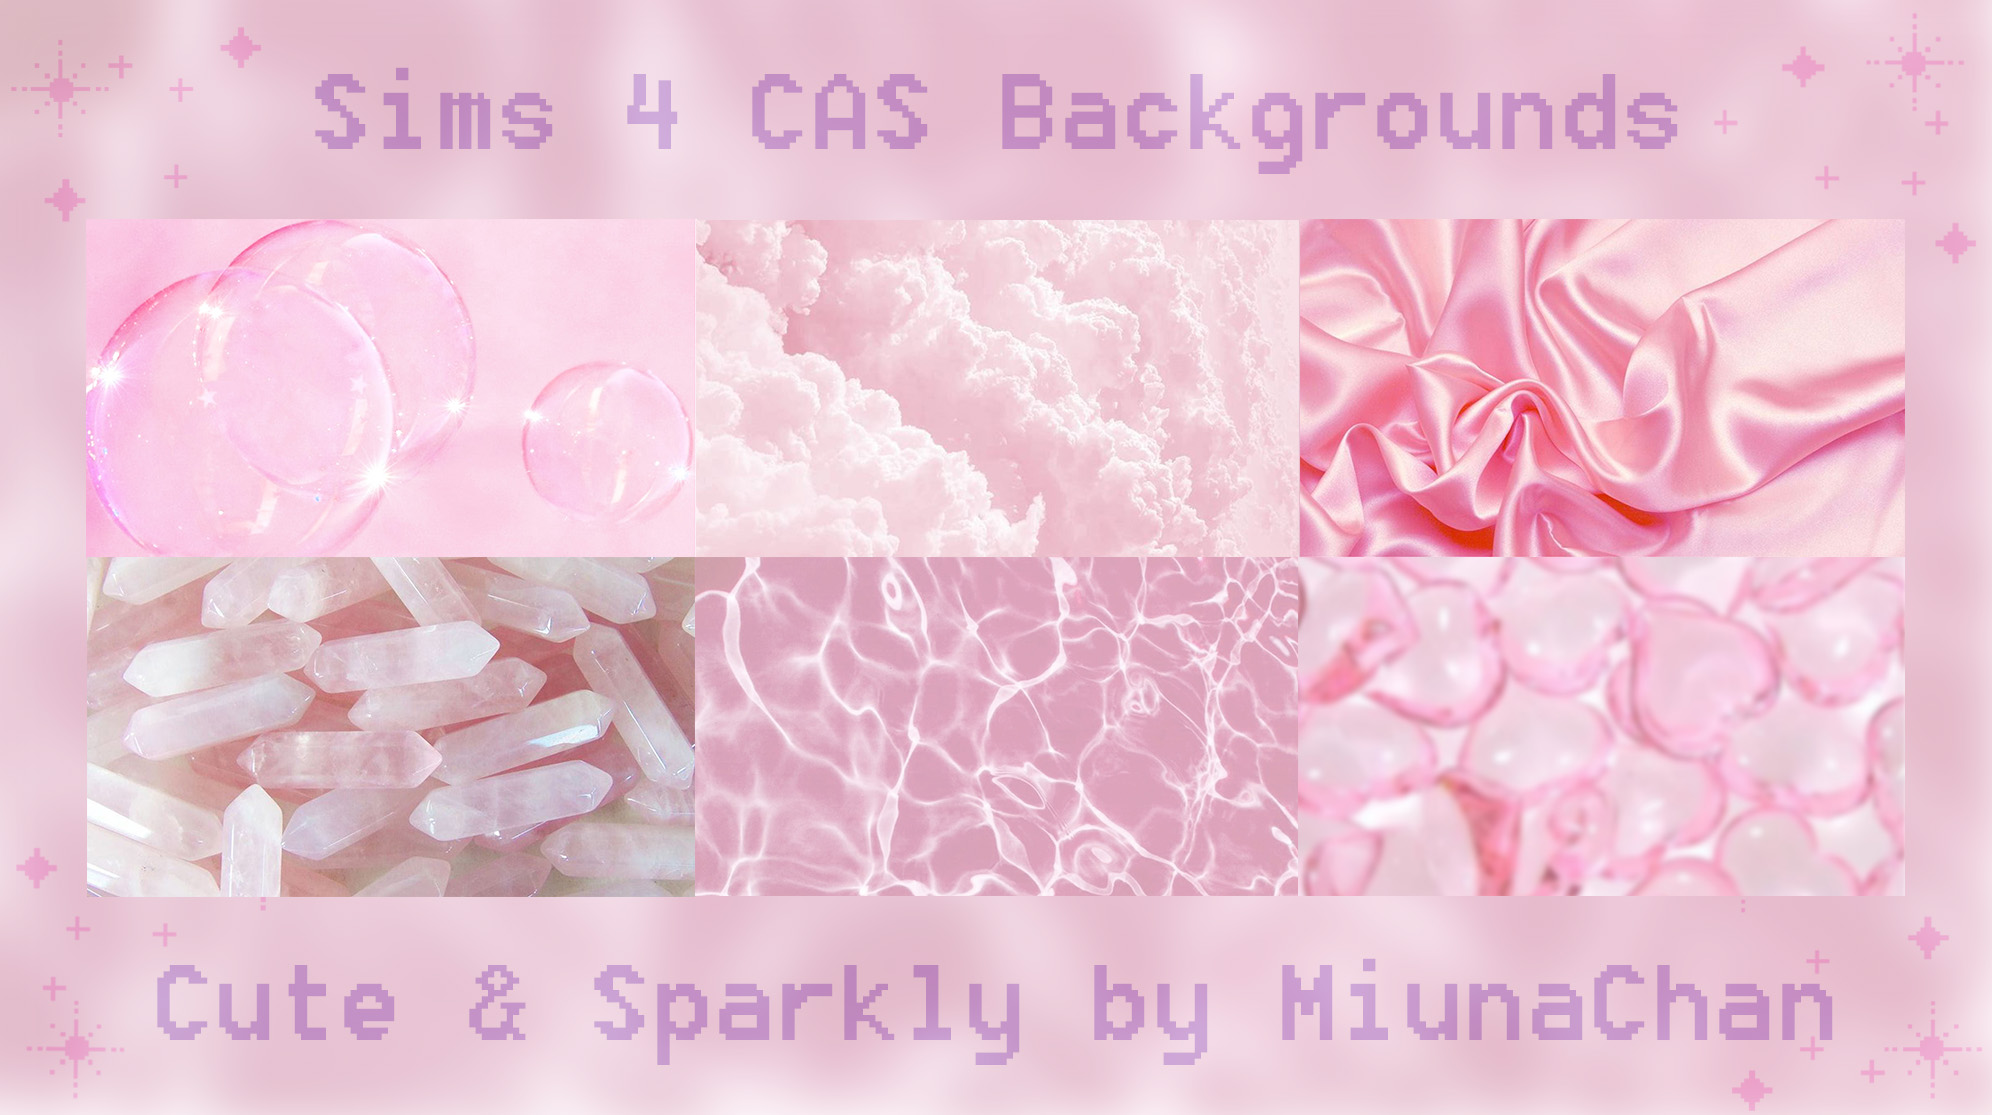 Pink CAS background SIMS 4. SIMS 4 CAS background. Фон в КАС симс 4 бордовый.